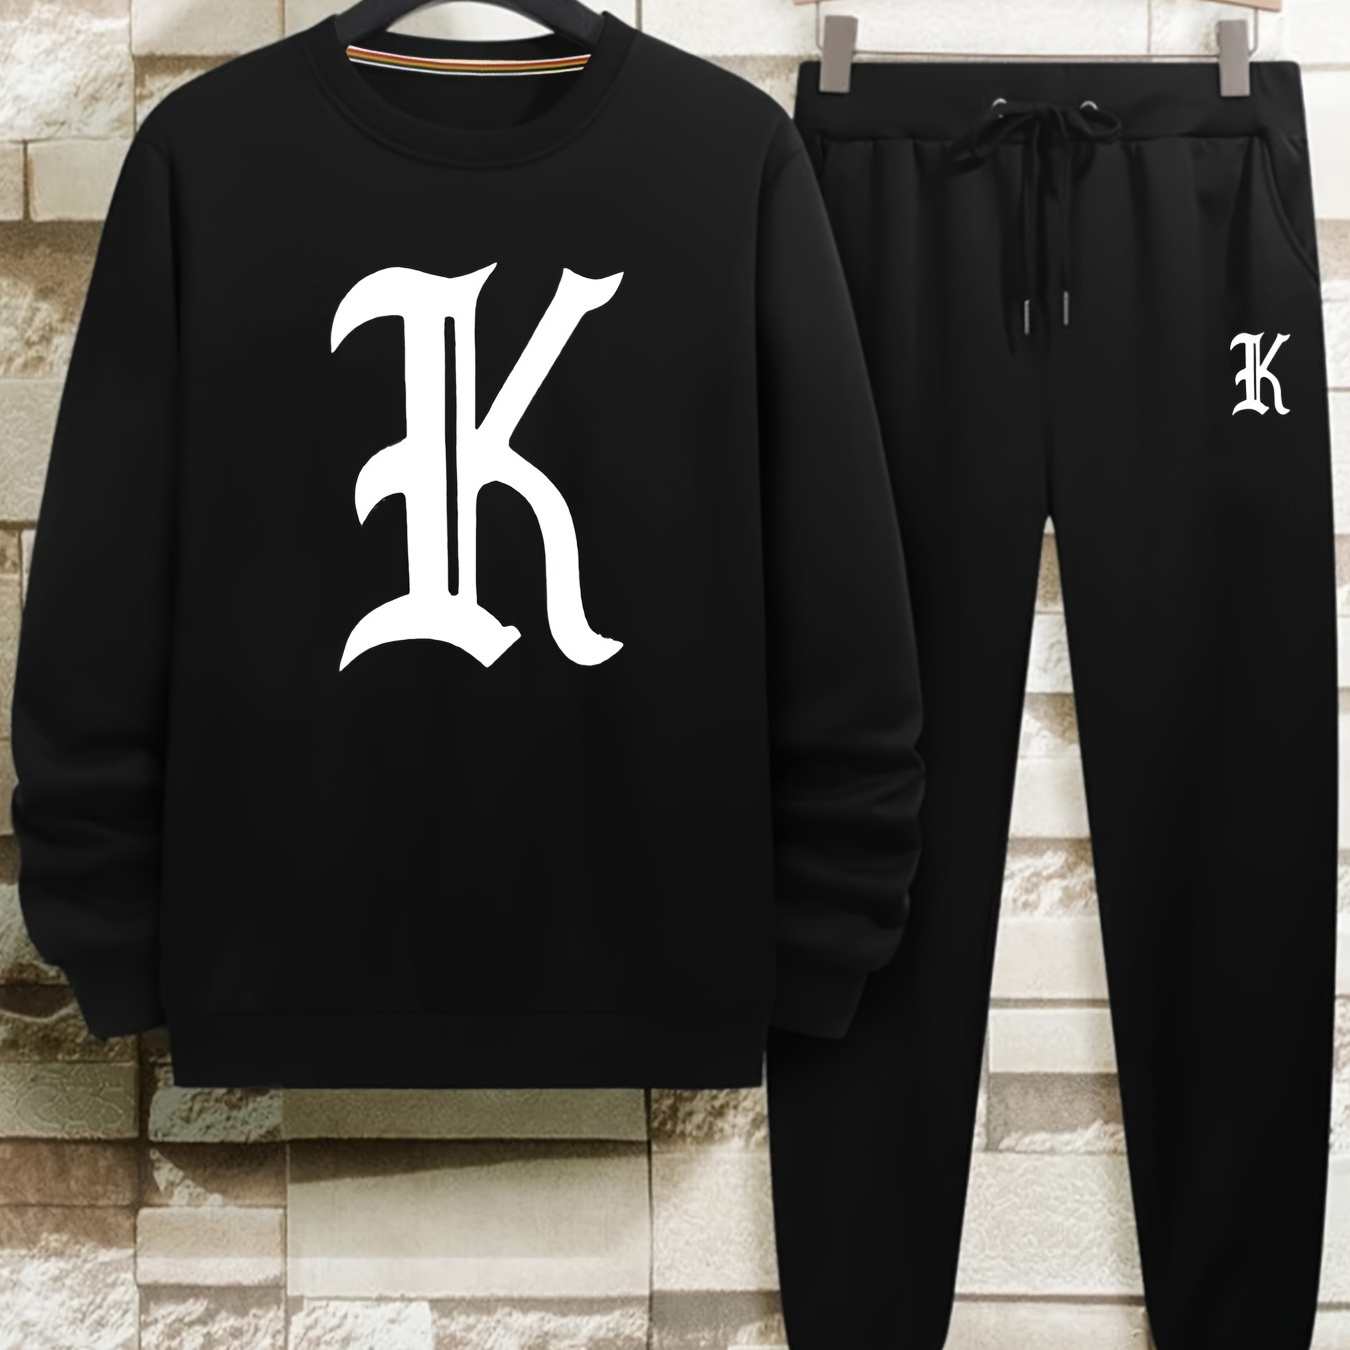 

Men's Creative K Graphic Print Round Neck Casual Outfit Set, 2 Pieces Long Sleeve Pullover Sweatshirt And Drawstring Sweatpants